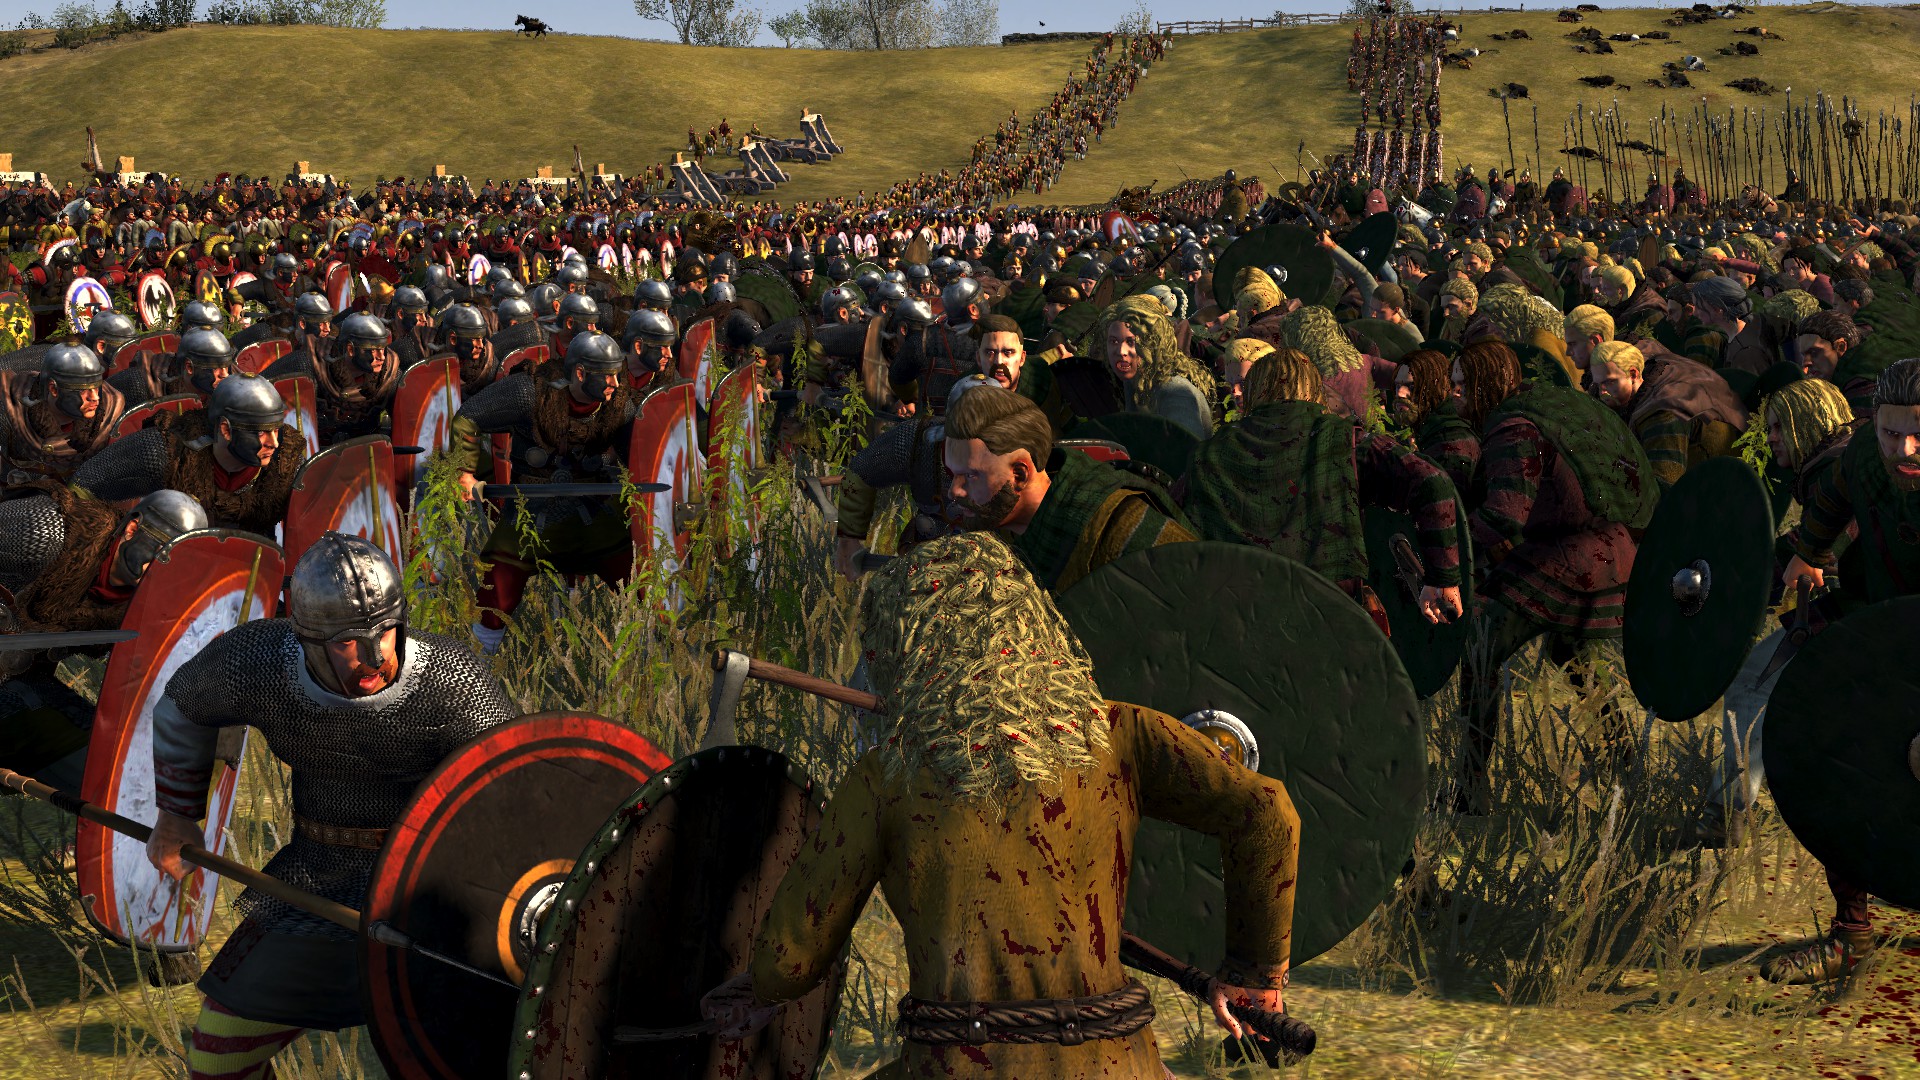 agrez all in one mod for total war attila, image 12, image, screenshots, sc...